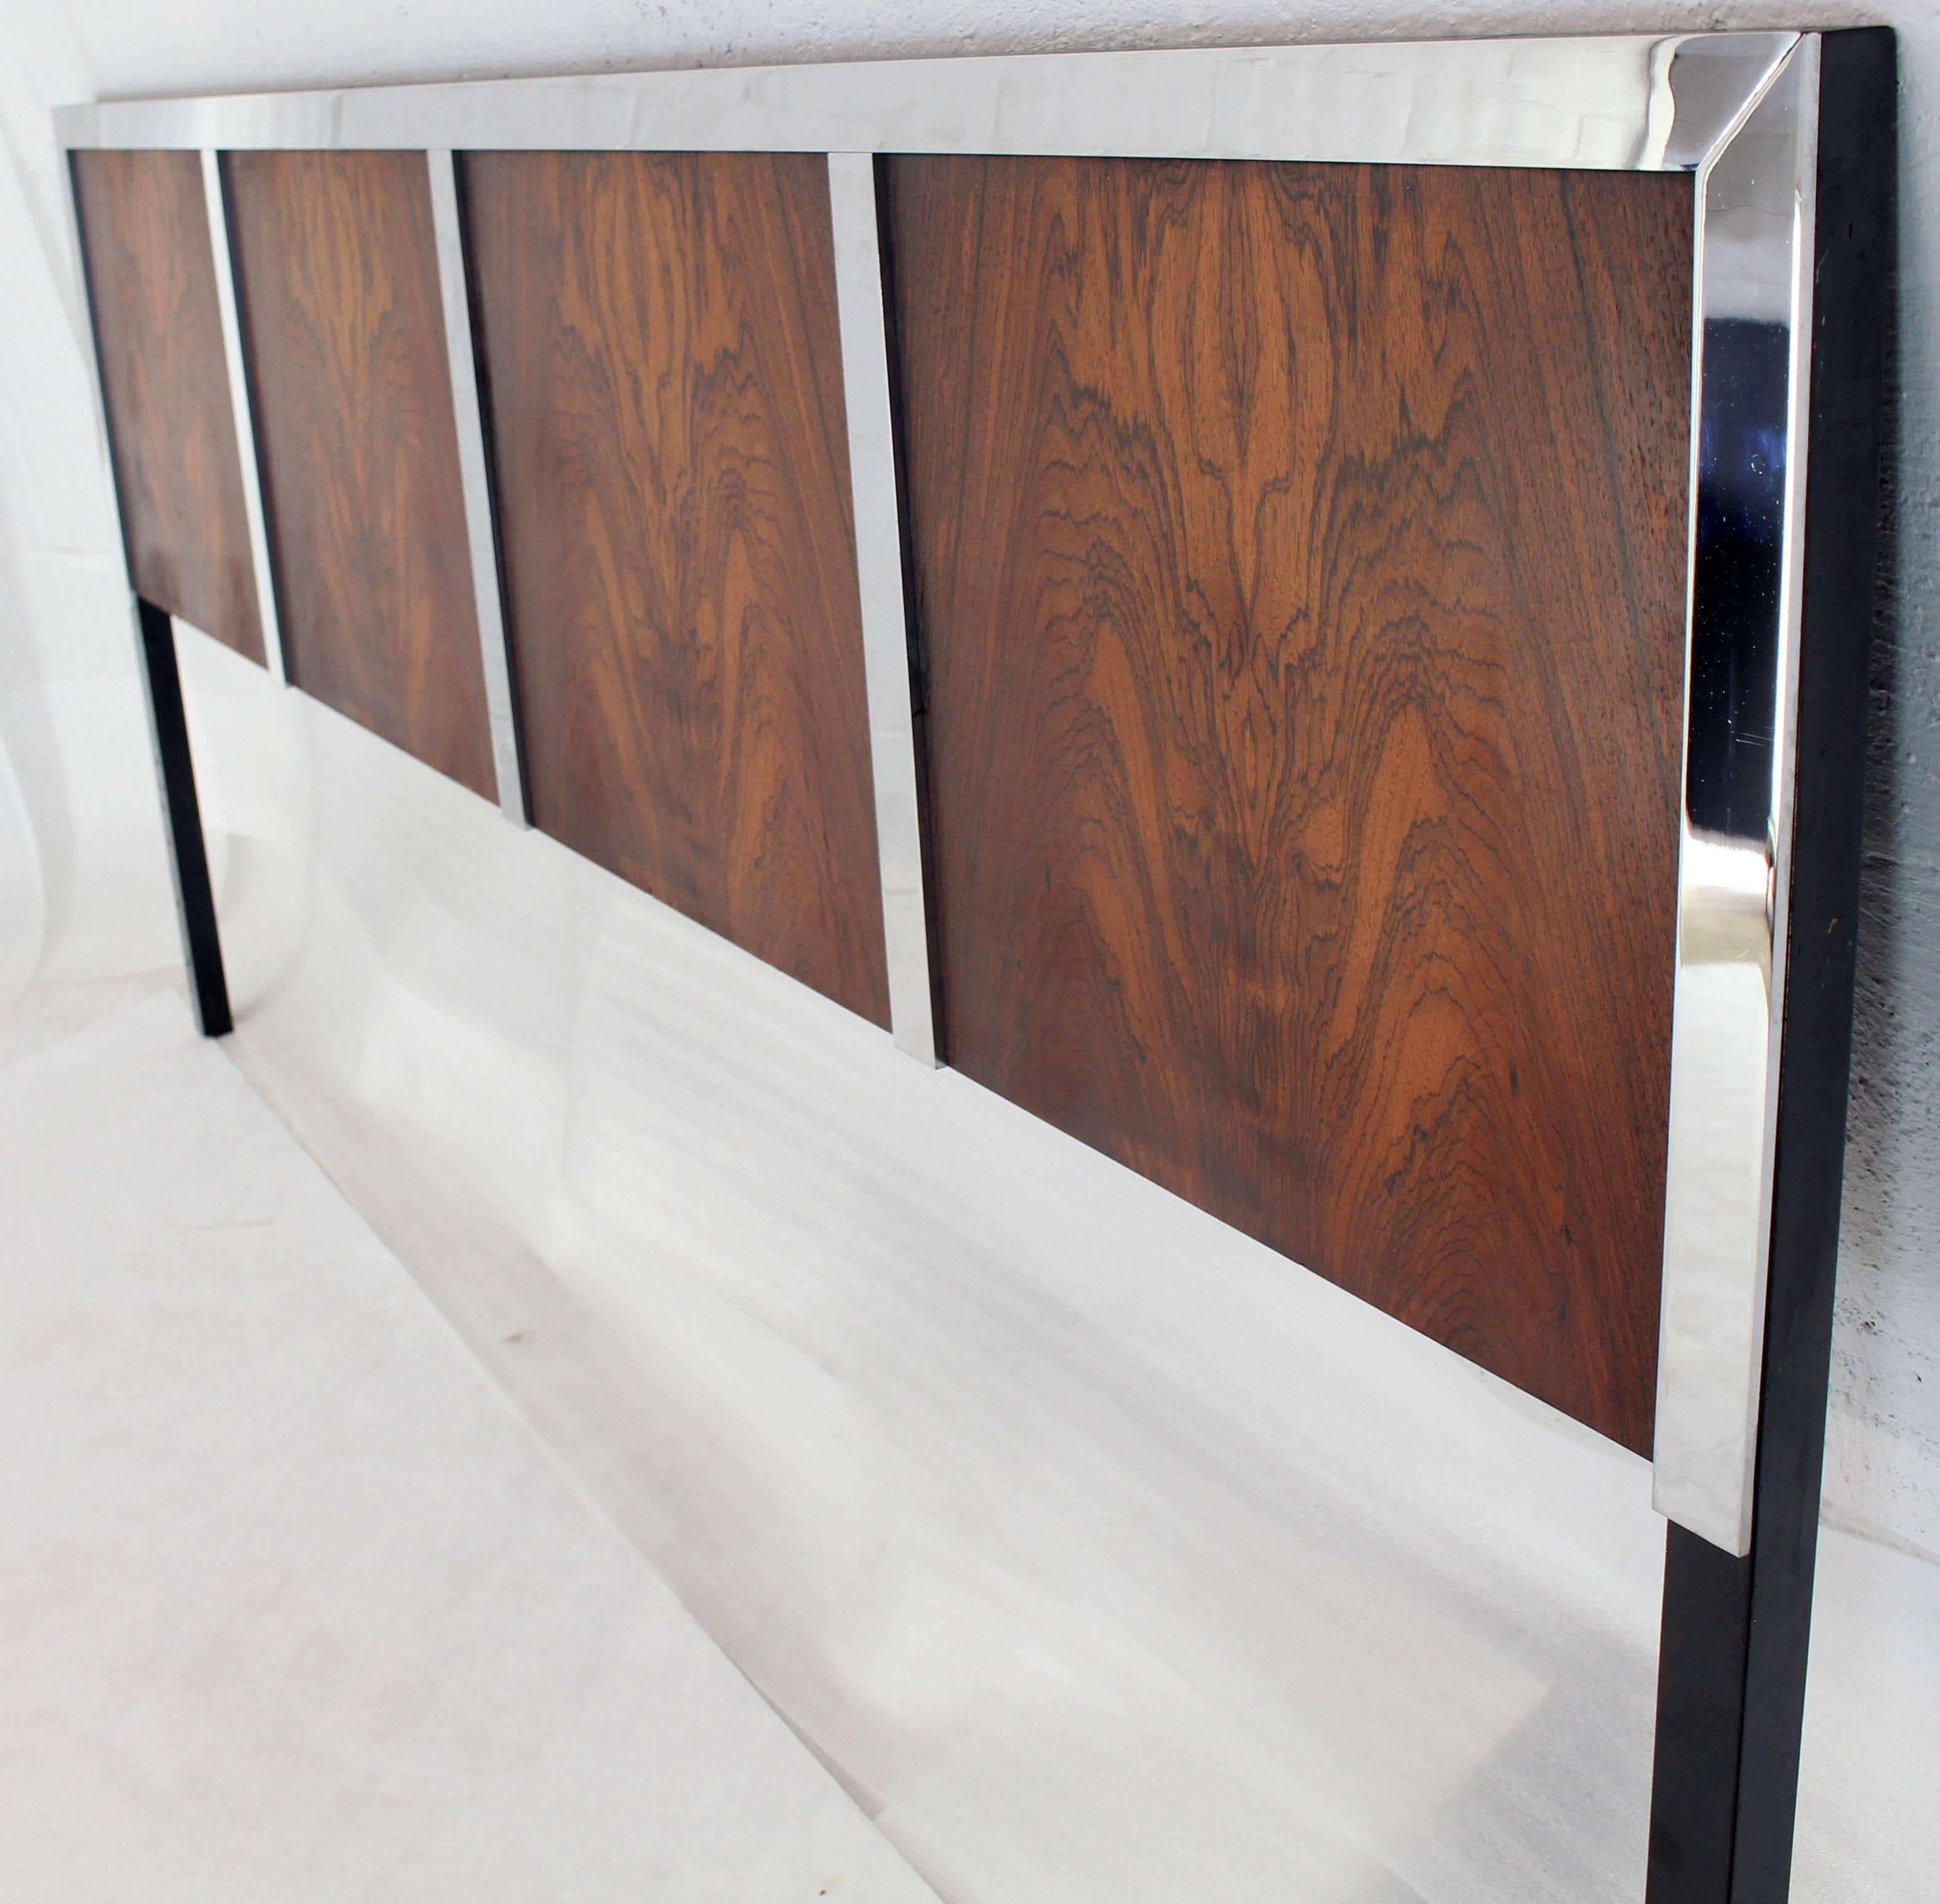 Heavy chrome border around flame pattern rosewood Mid-Century Modern king-size headboard bed.